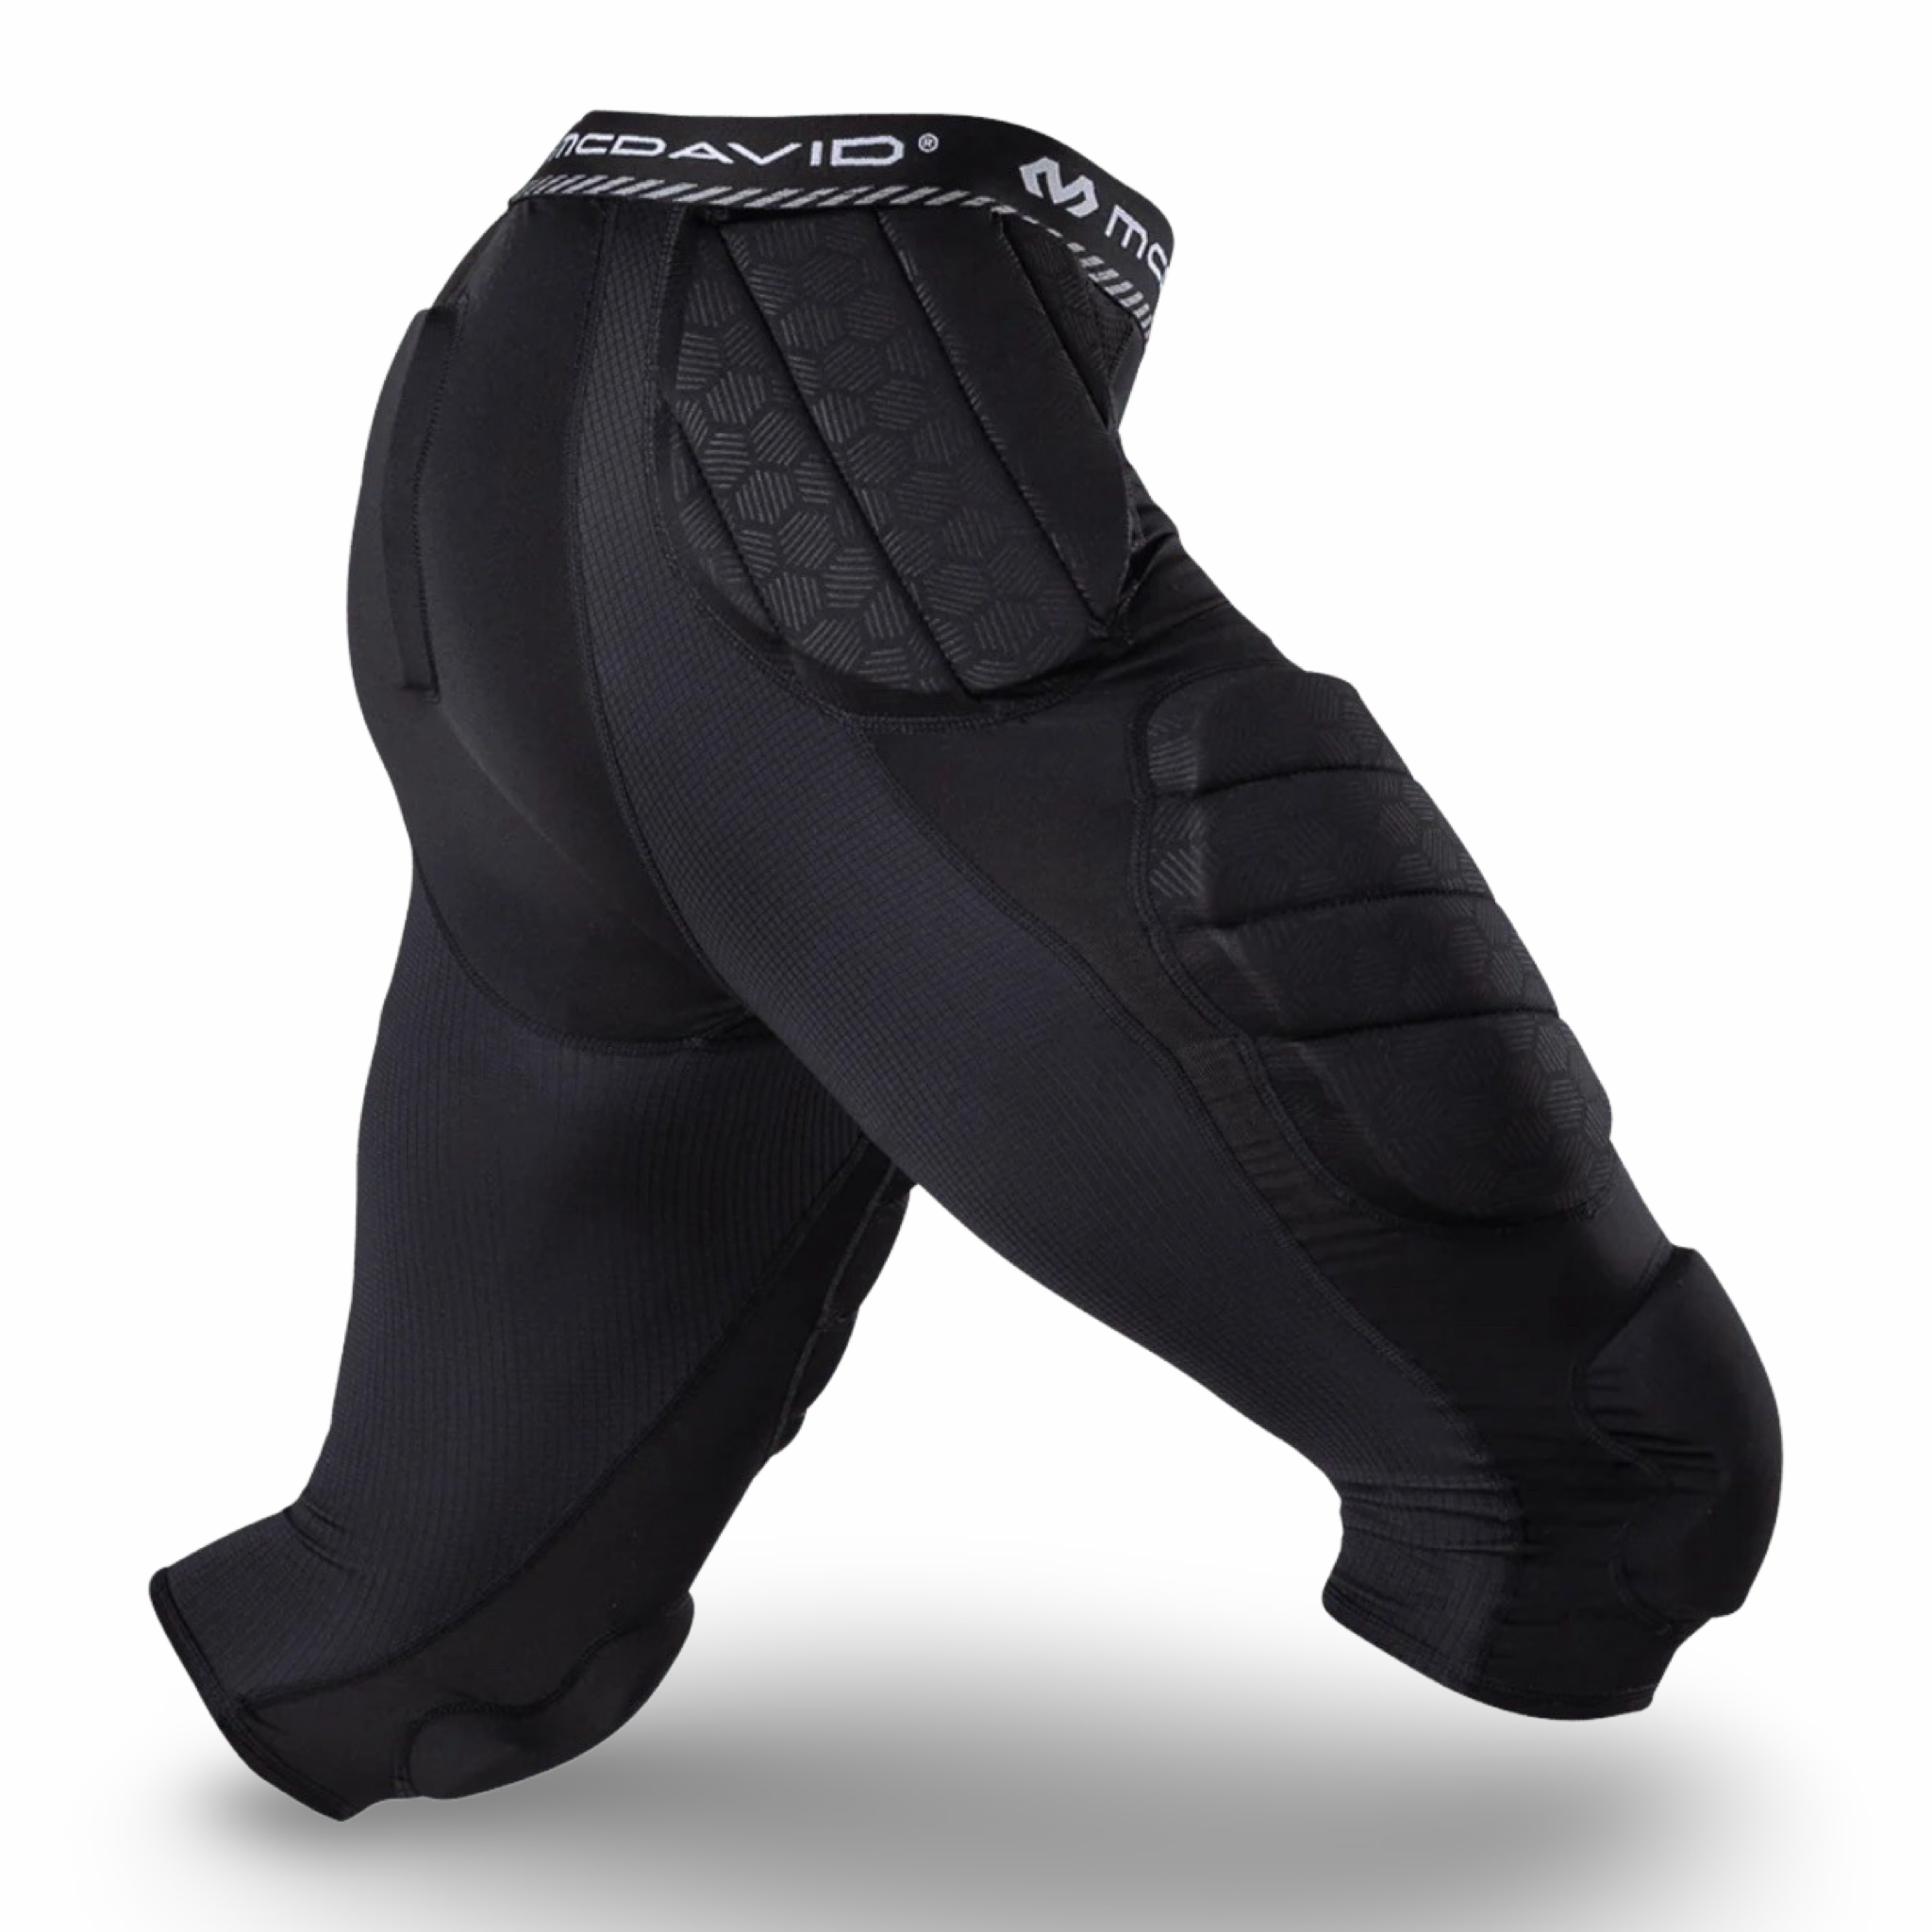 MD Rival™ 7-Pad ¾ Football Girdle - Adult & Youth